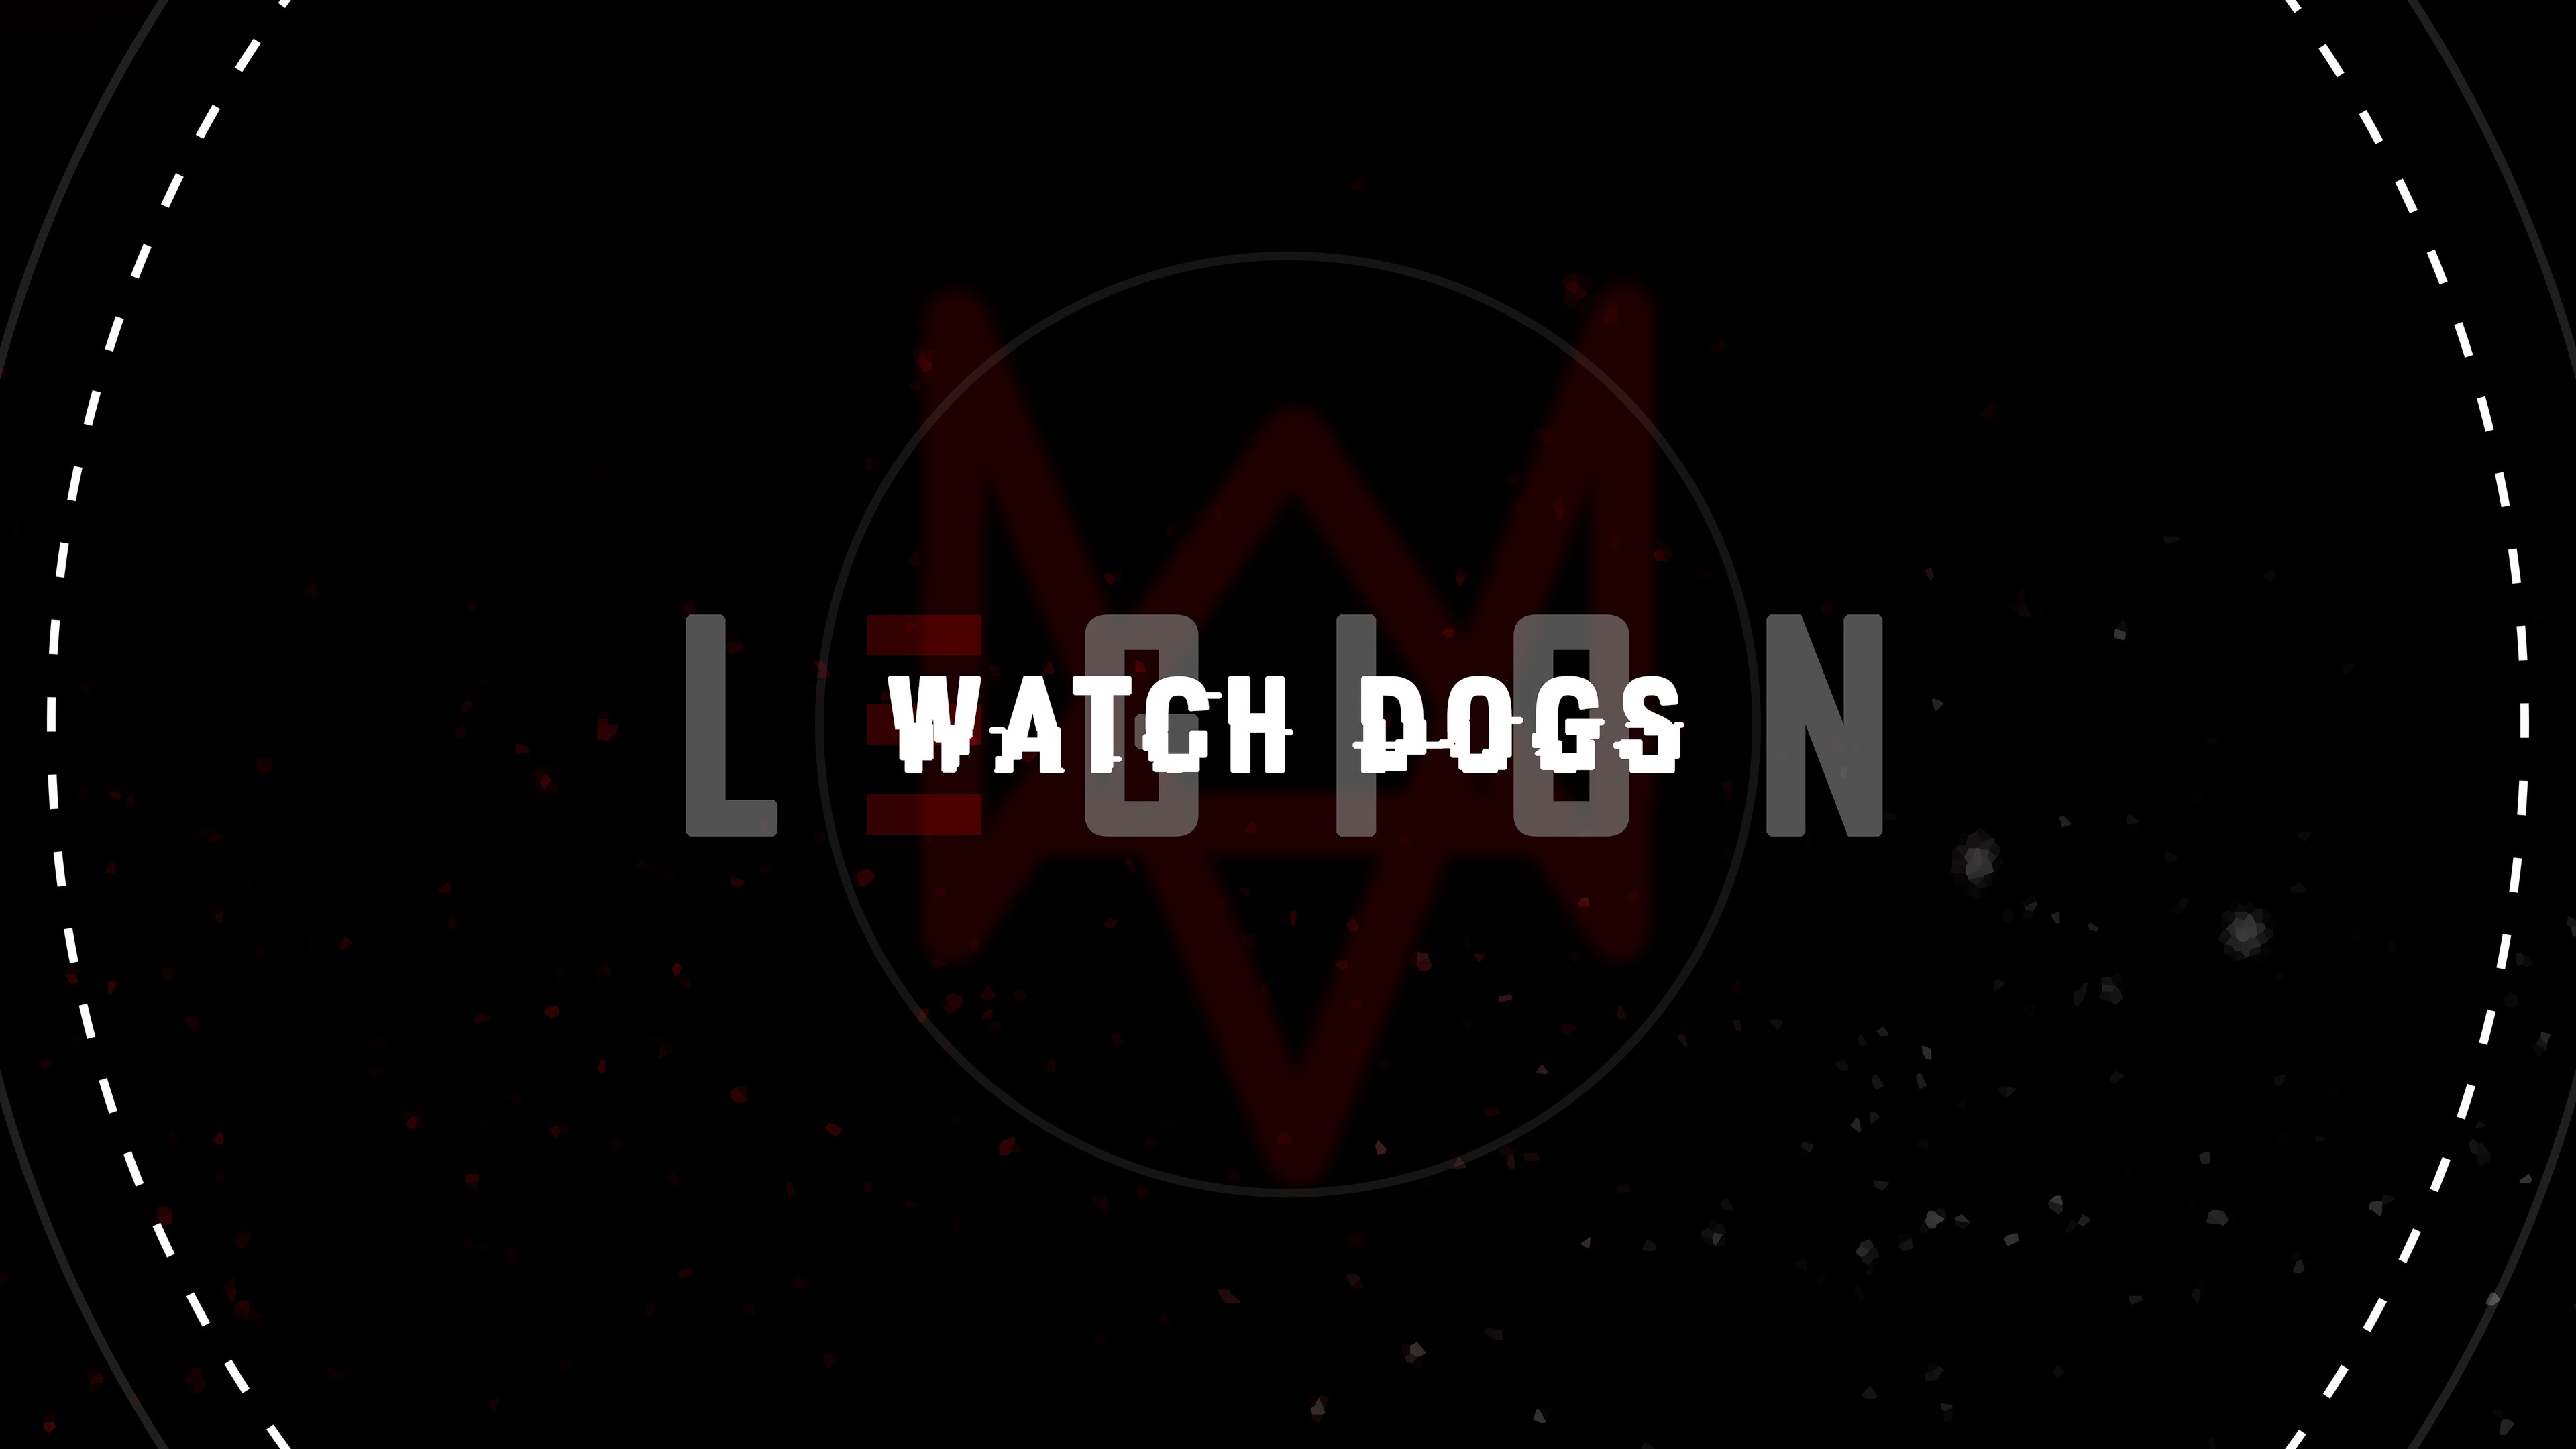 how to download watch dogs legion of the dead